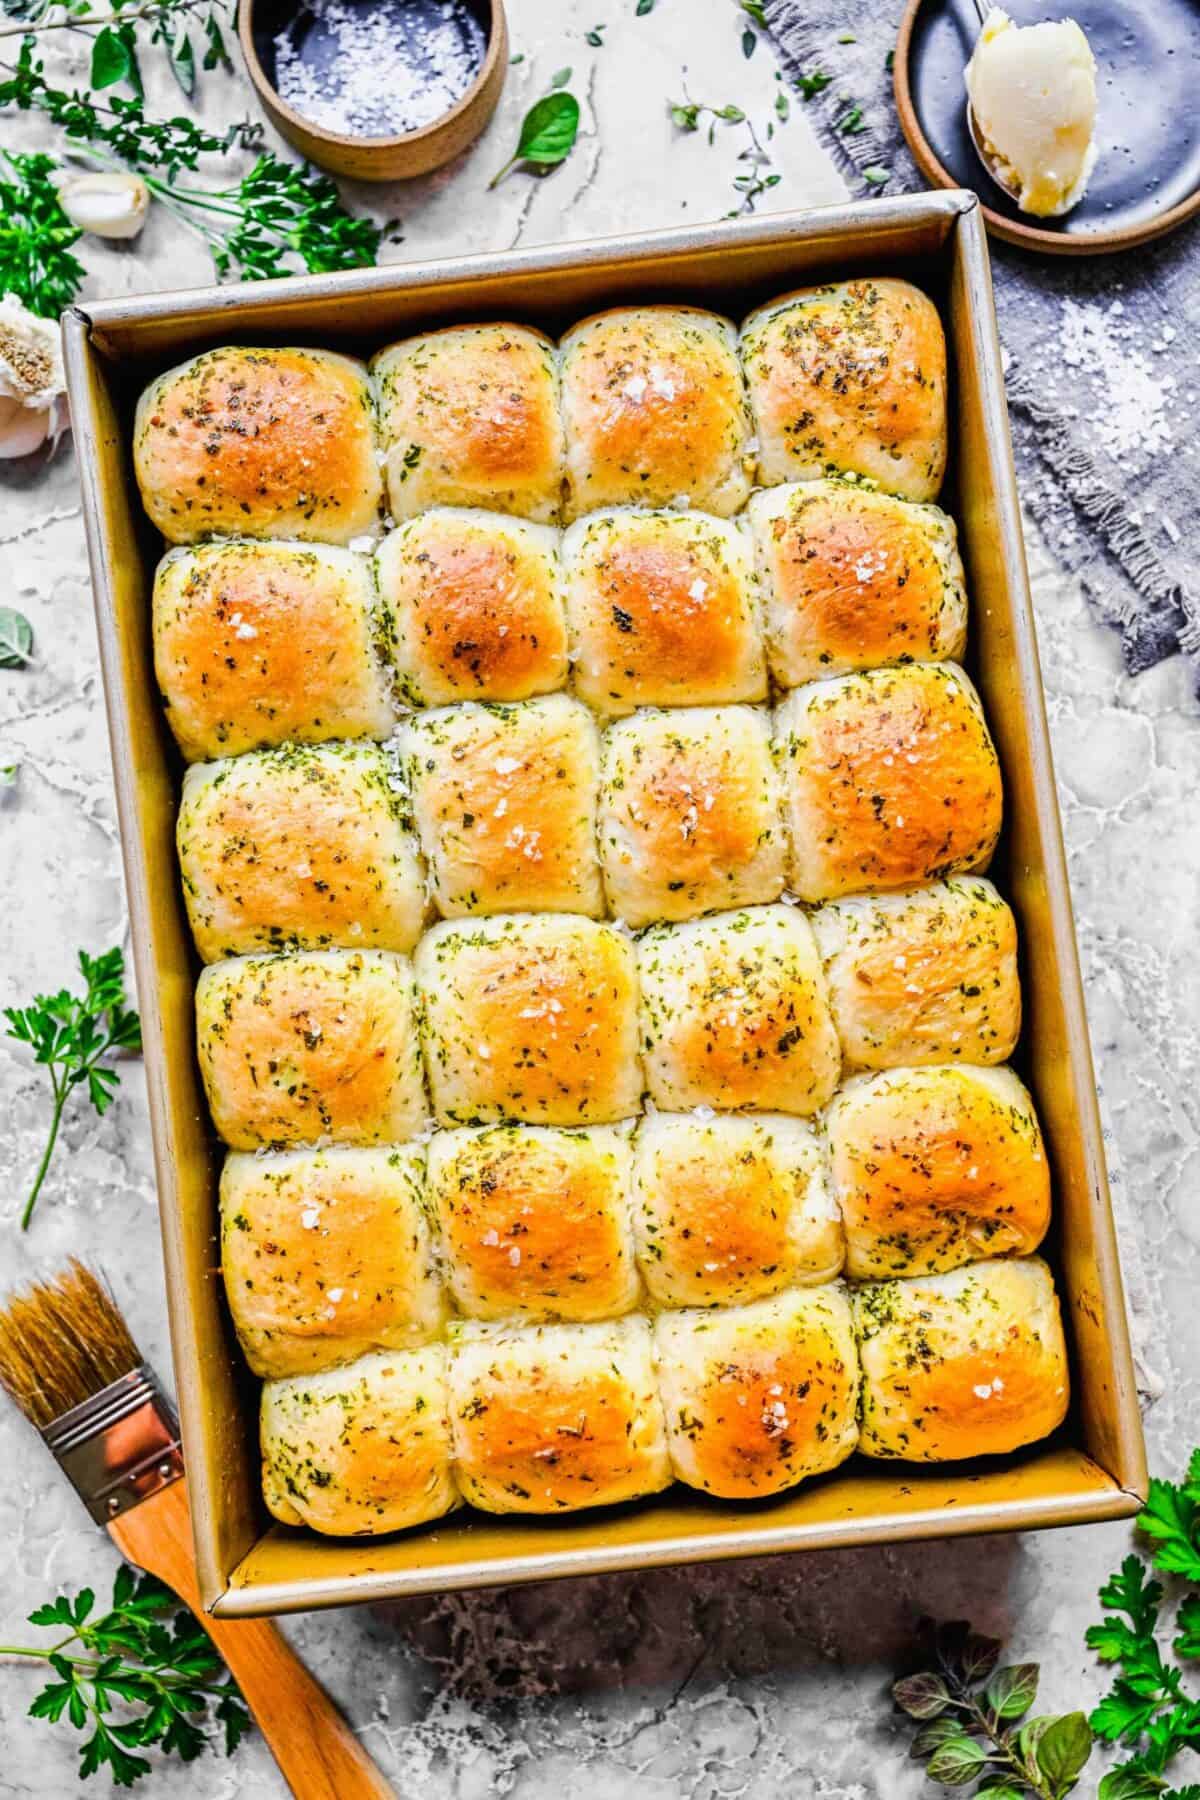 A tray of 24 garlic herb parker house rolls, fully baked, topped with herbs, next to some fresh herbs and a baking brush